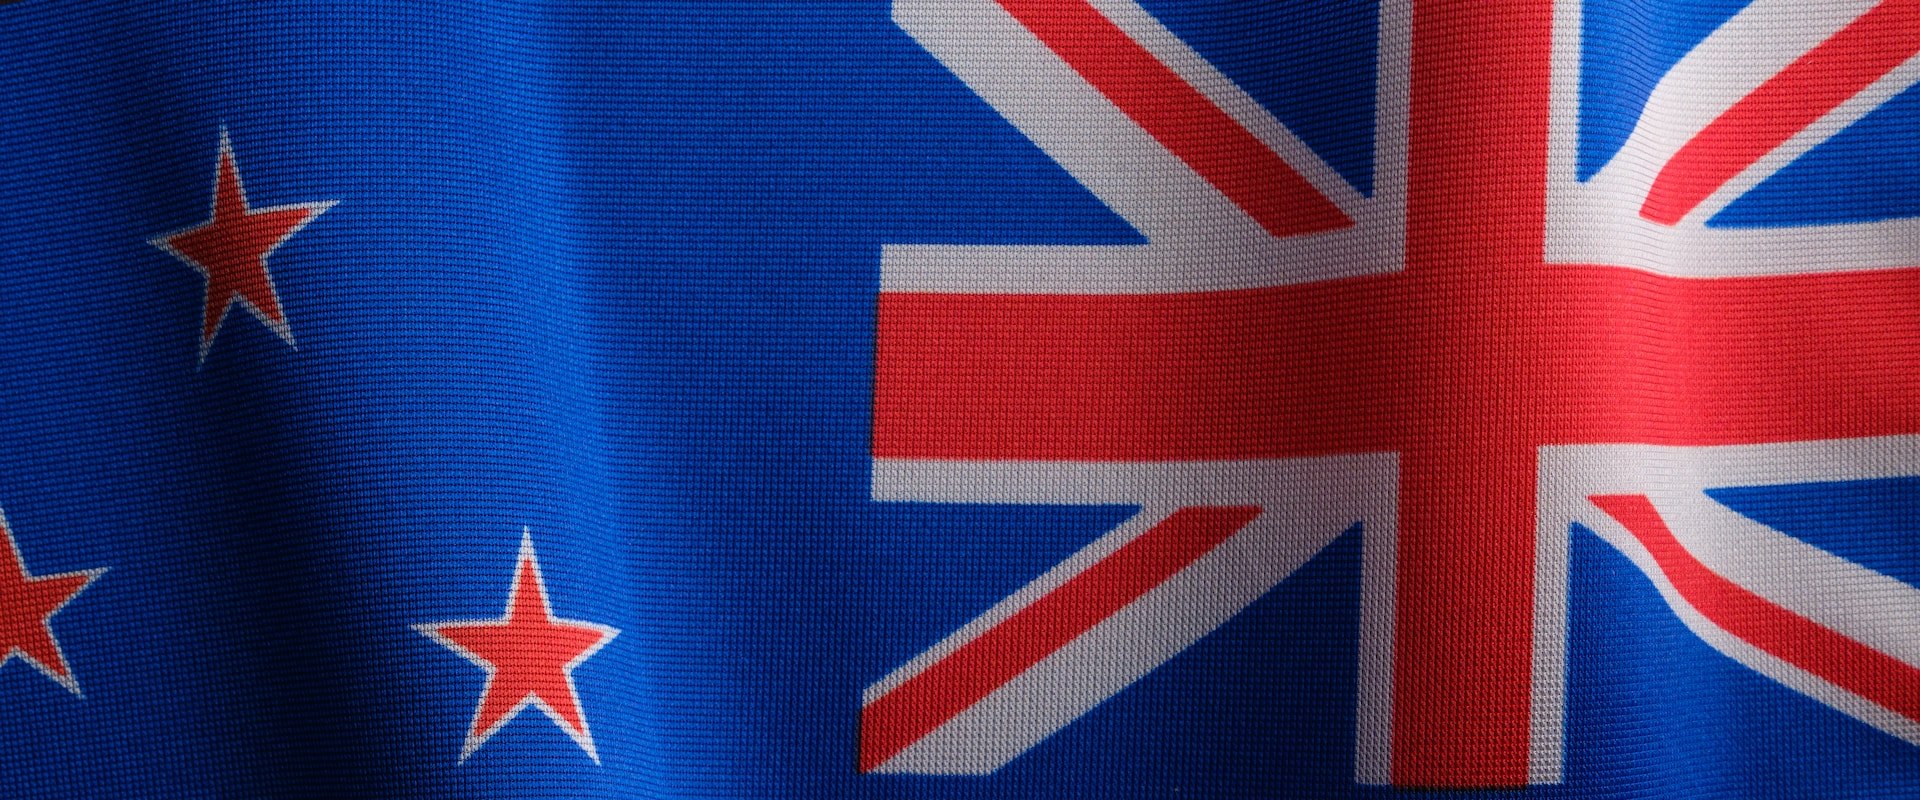 Filing Fees for Trademark Registration in New Zealand